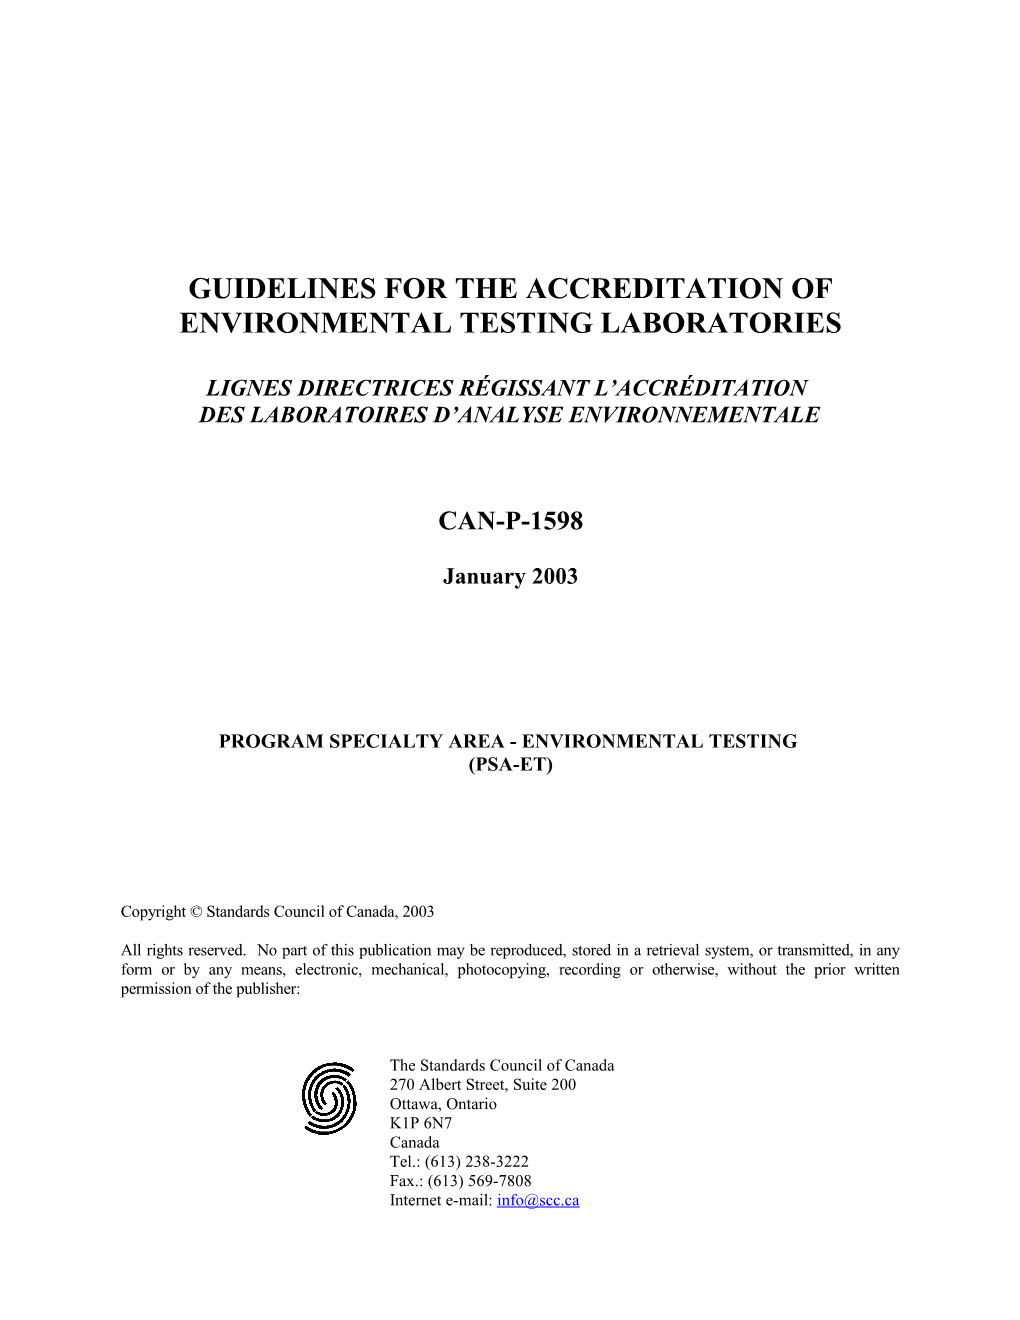 Guidelines for the Accreditation of Environmental Testing Laboratories